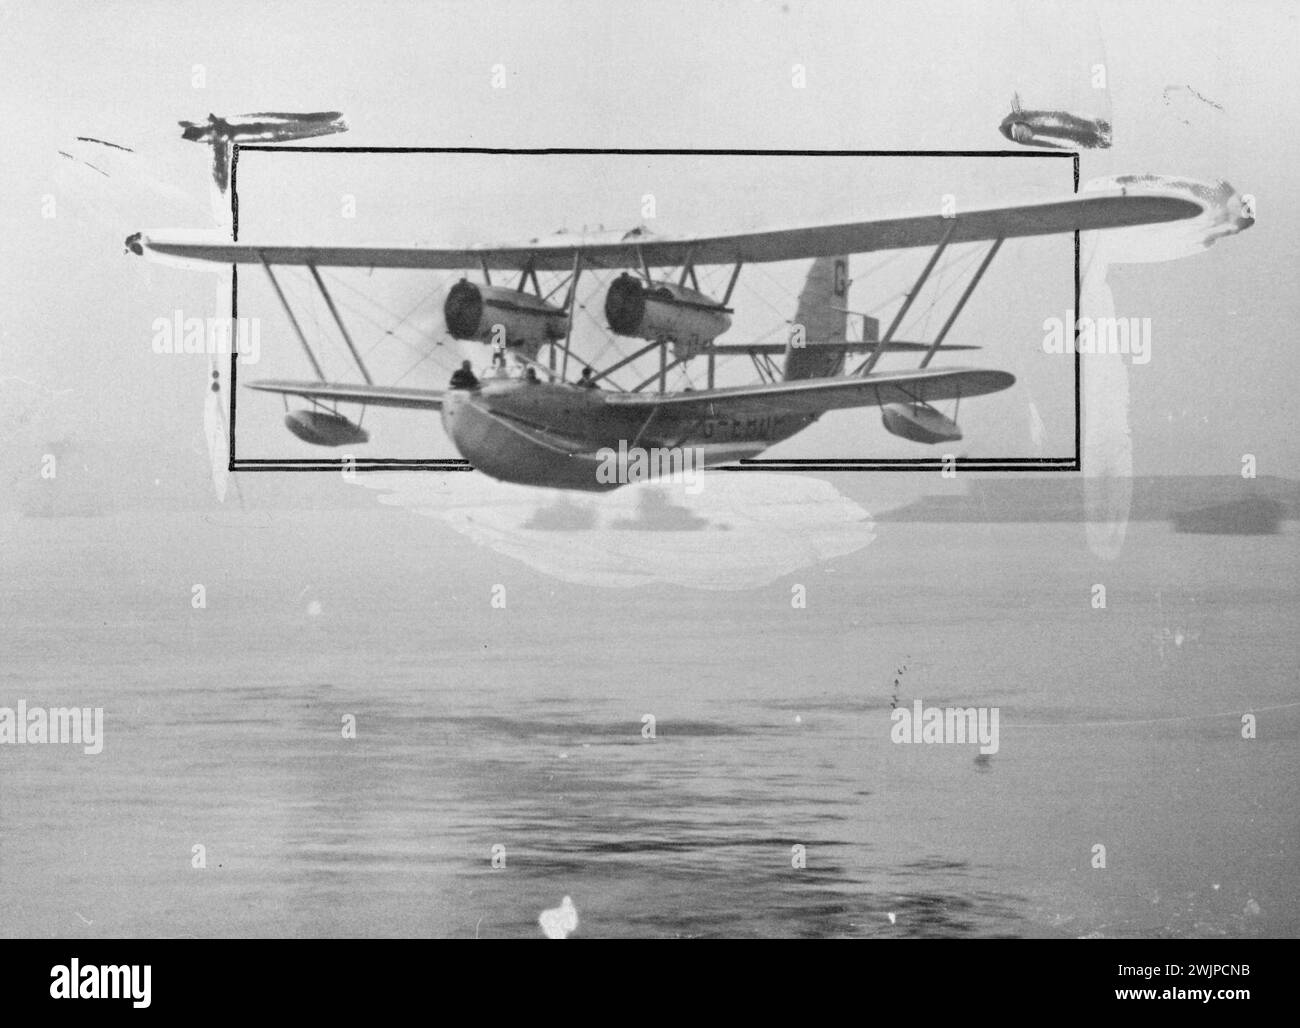 Sir Alan Cobham Tests His Machine For Africa Flight -- The giant all-metal Singapore flying boat, in which Sir Alan Cobham is to make a survey round Africa in the air, at Rochester when it was piloted by Sir Alan on a trial flight. It is intended to start from Rochester some time next week. February 6, 1928. (Photo by Central News). Stock Photo